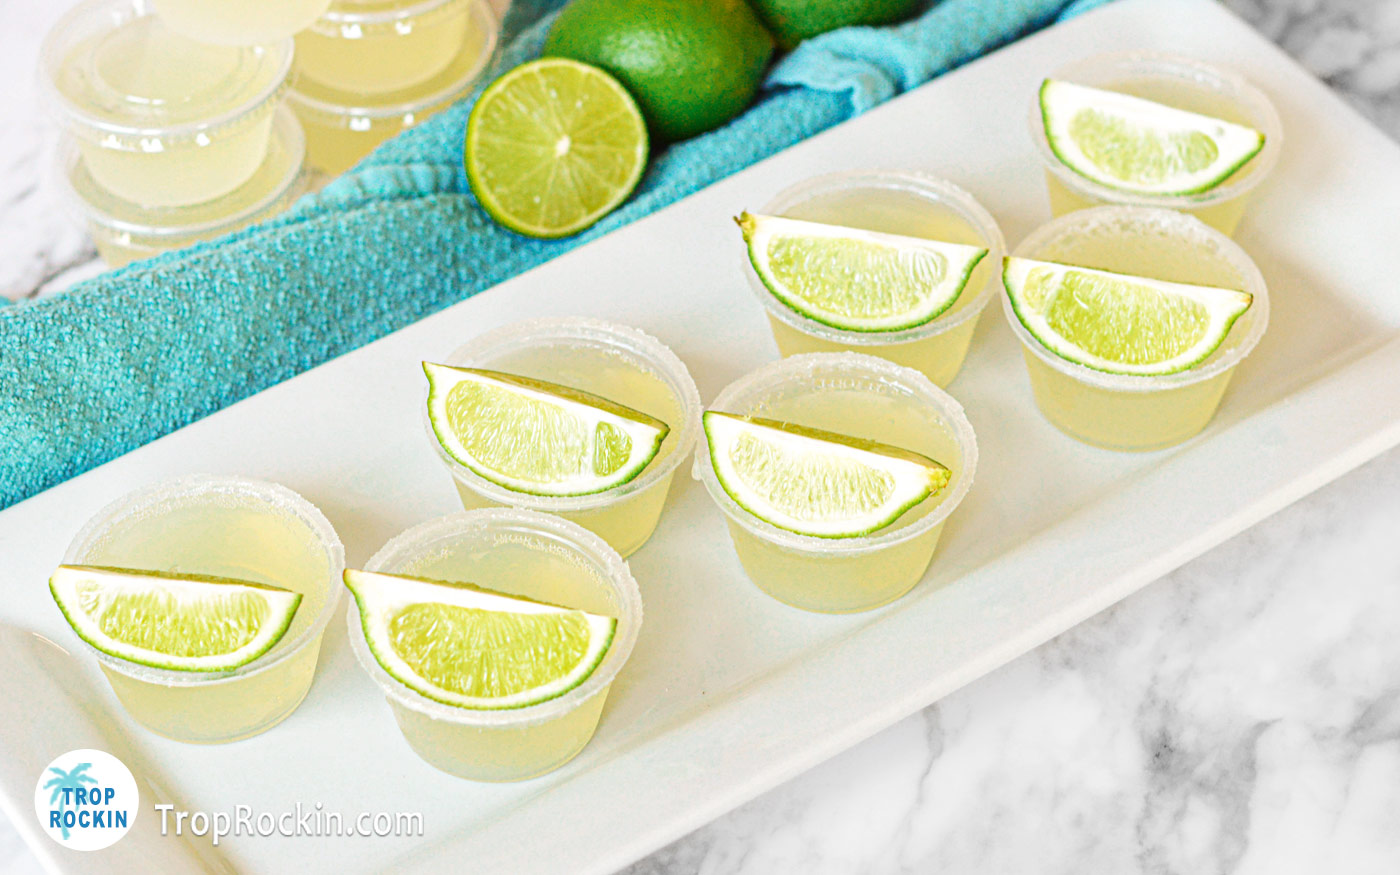 Margarita Tequila Jello Shots on a serving tray.